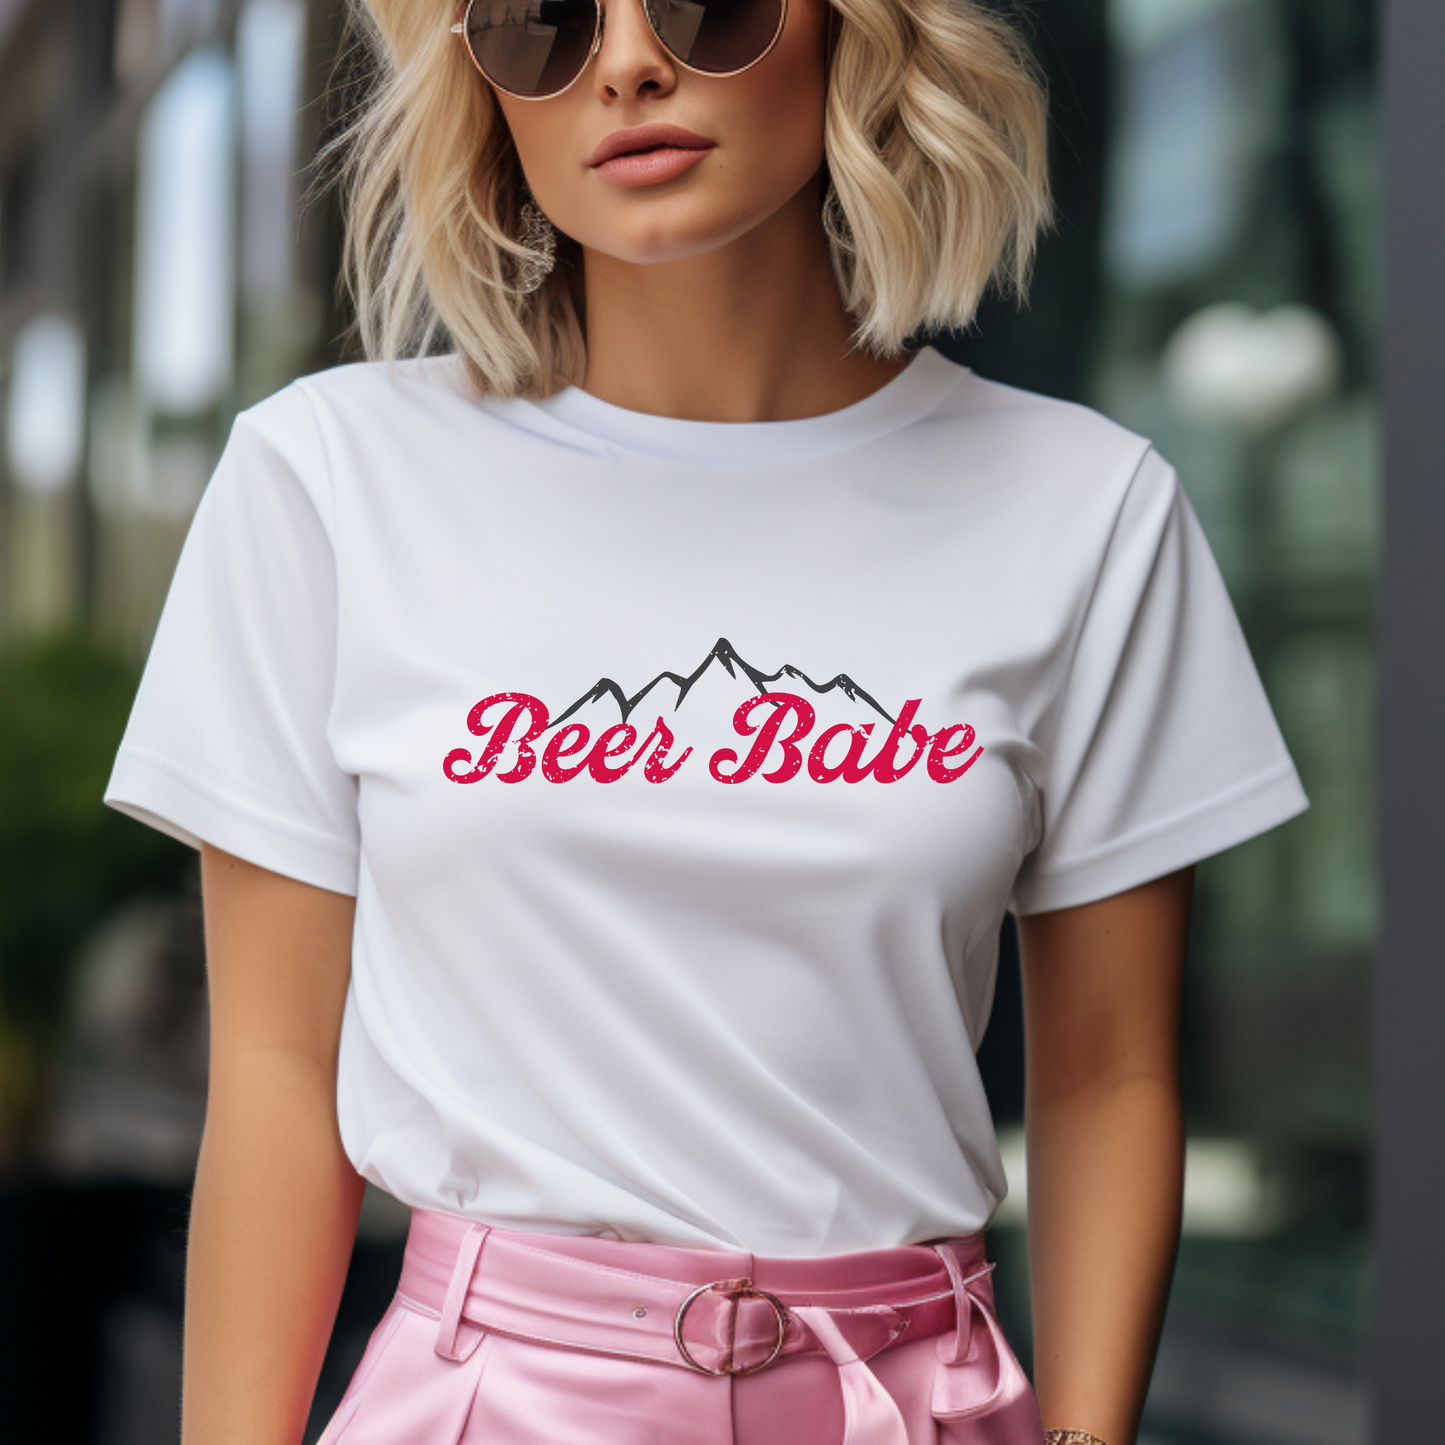 Beer Babe Short Sleeve Essential T Shirt - White